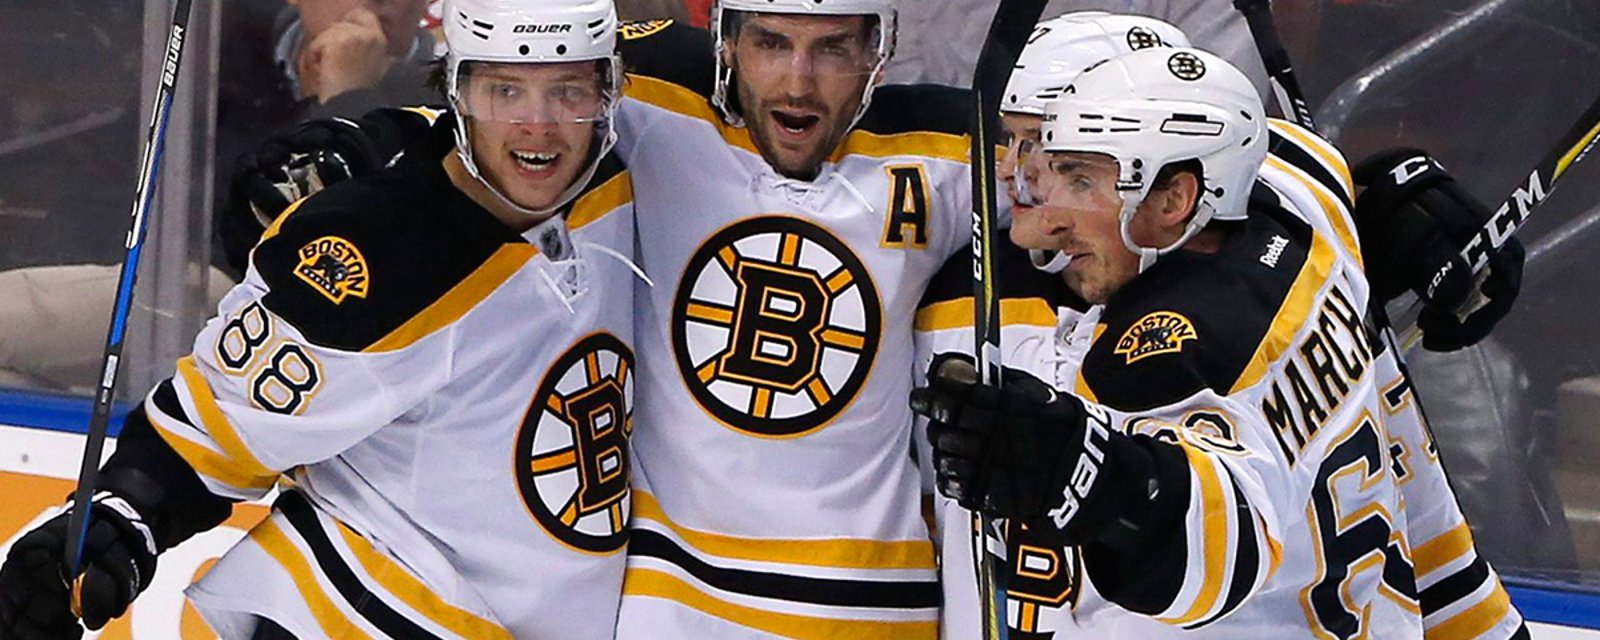 Cassidy planning on breaking up Bruins’ crazy top line?